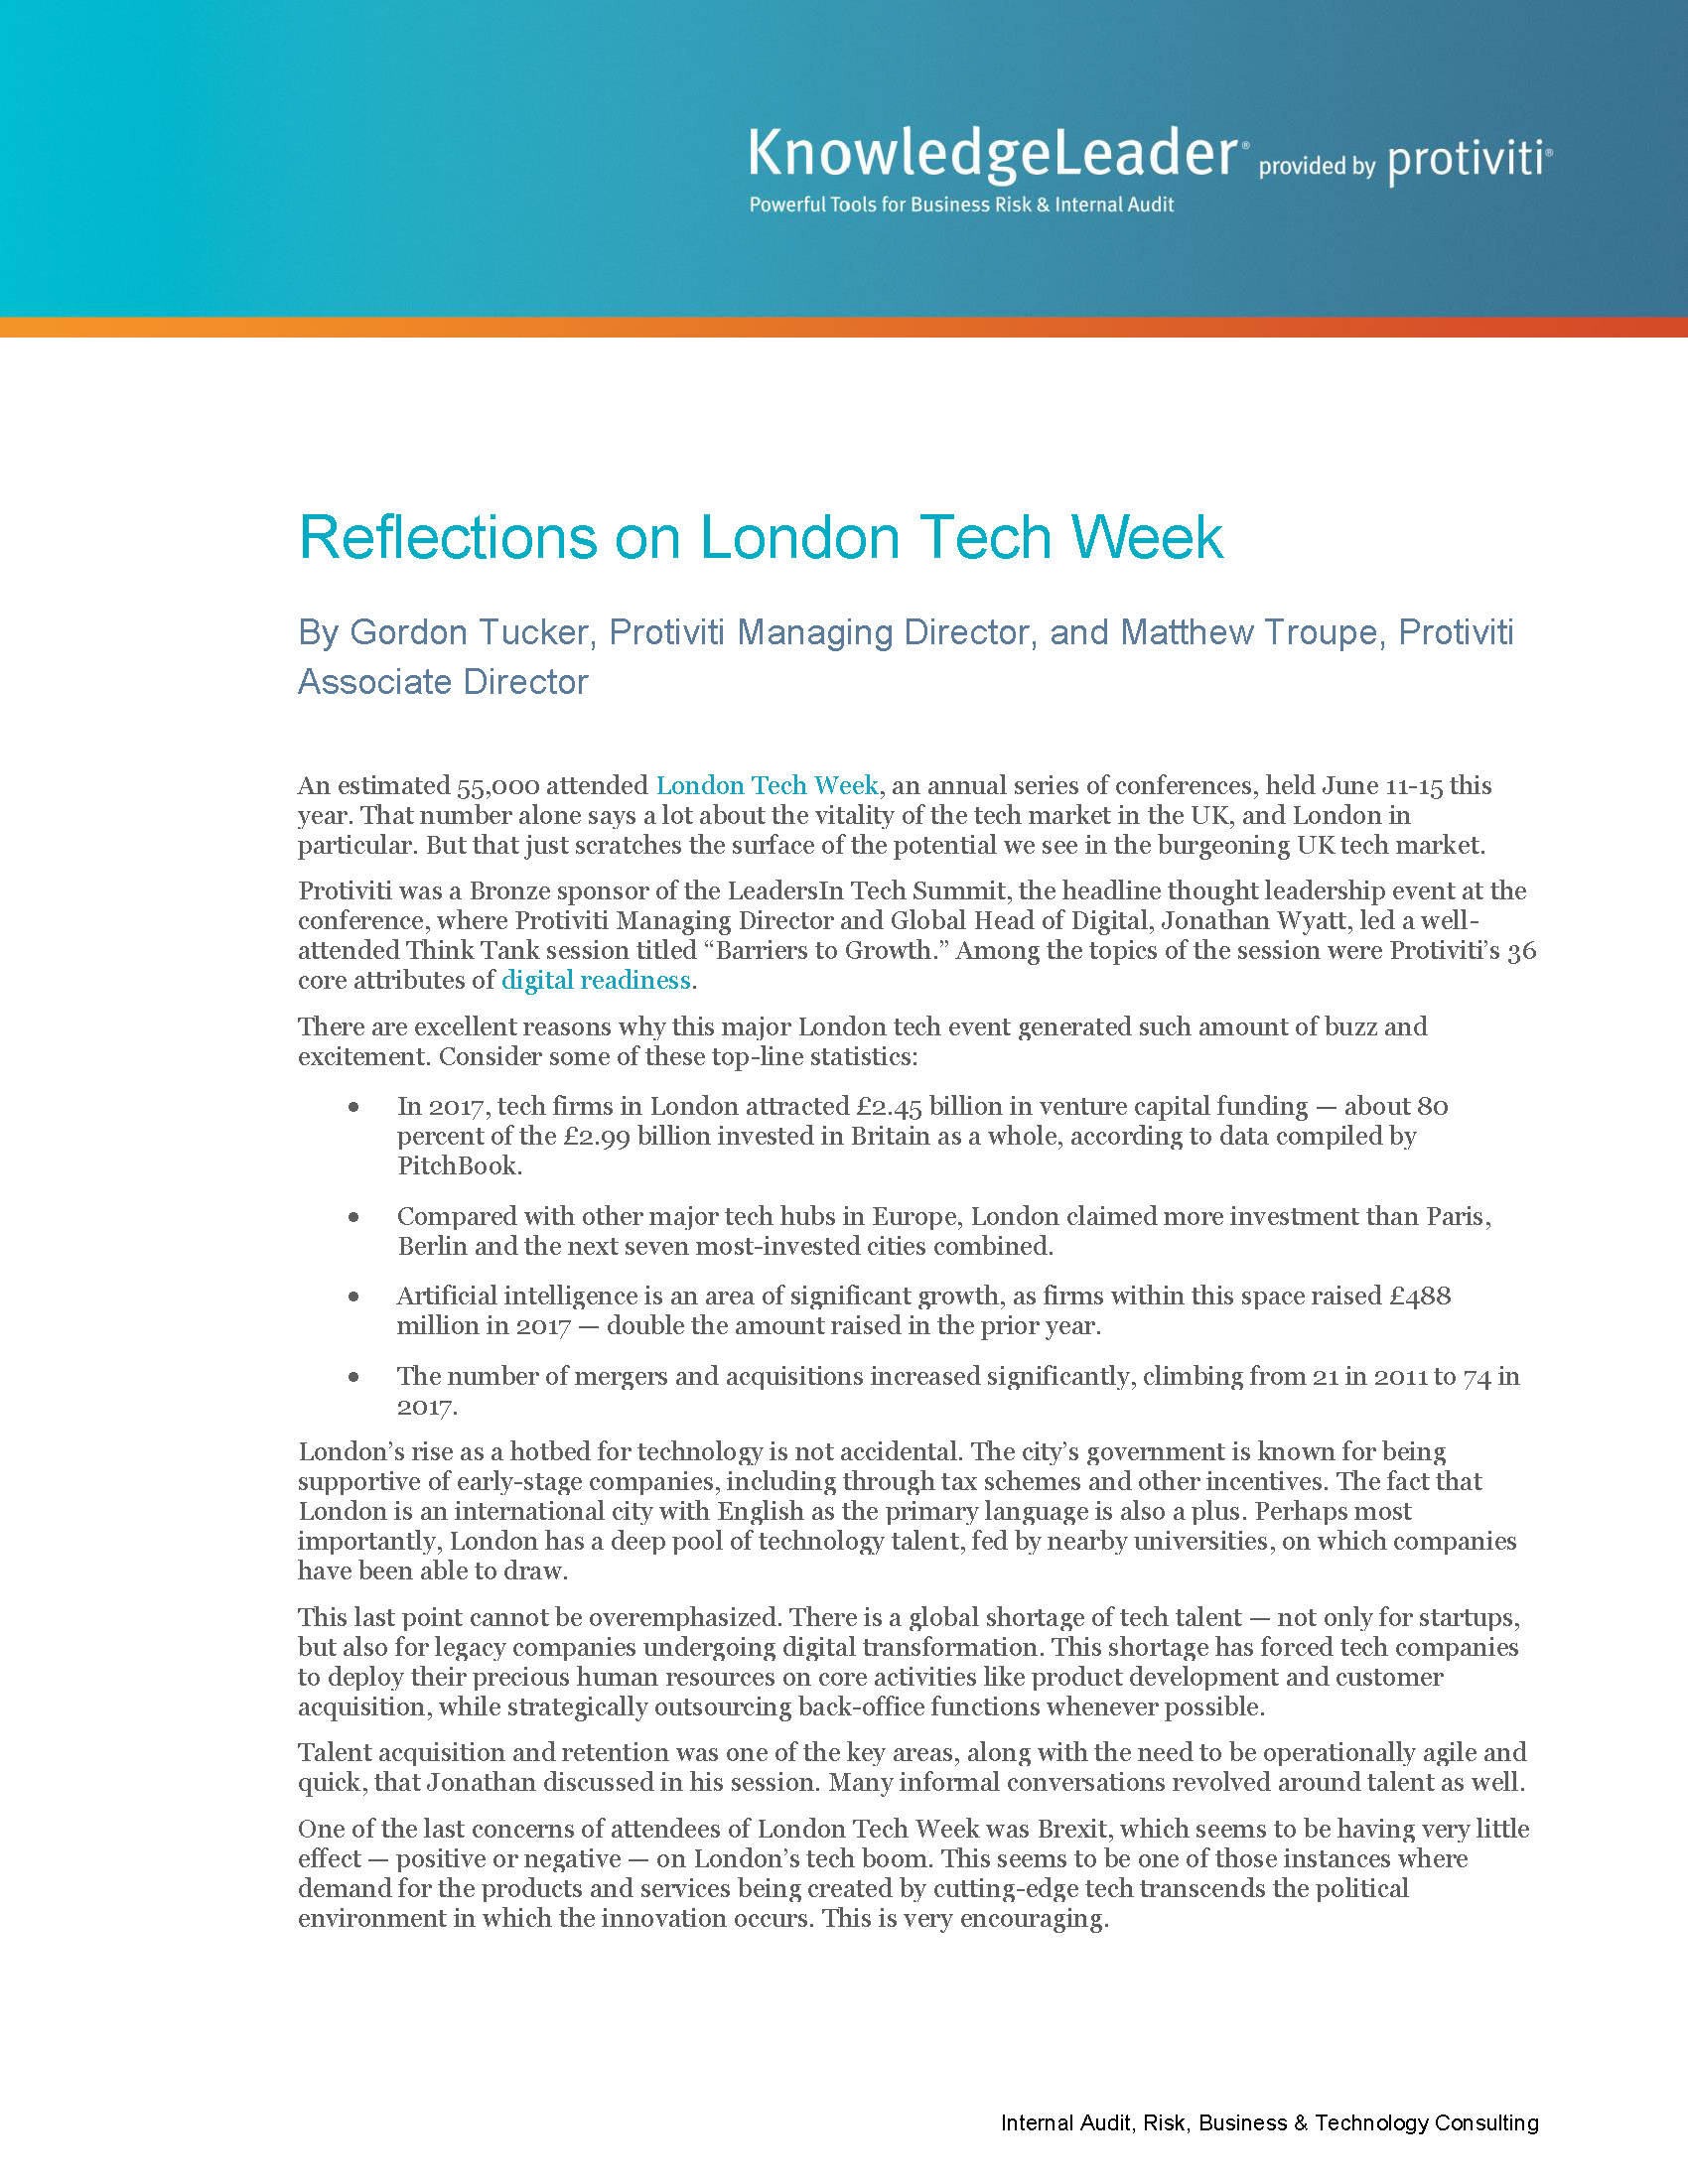 Screenshot of the first page of Reflections on London Tech Week